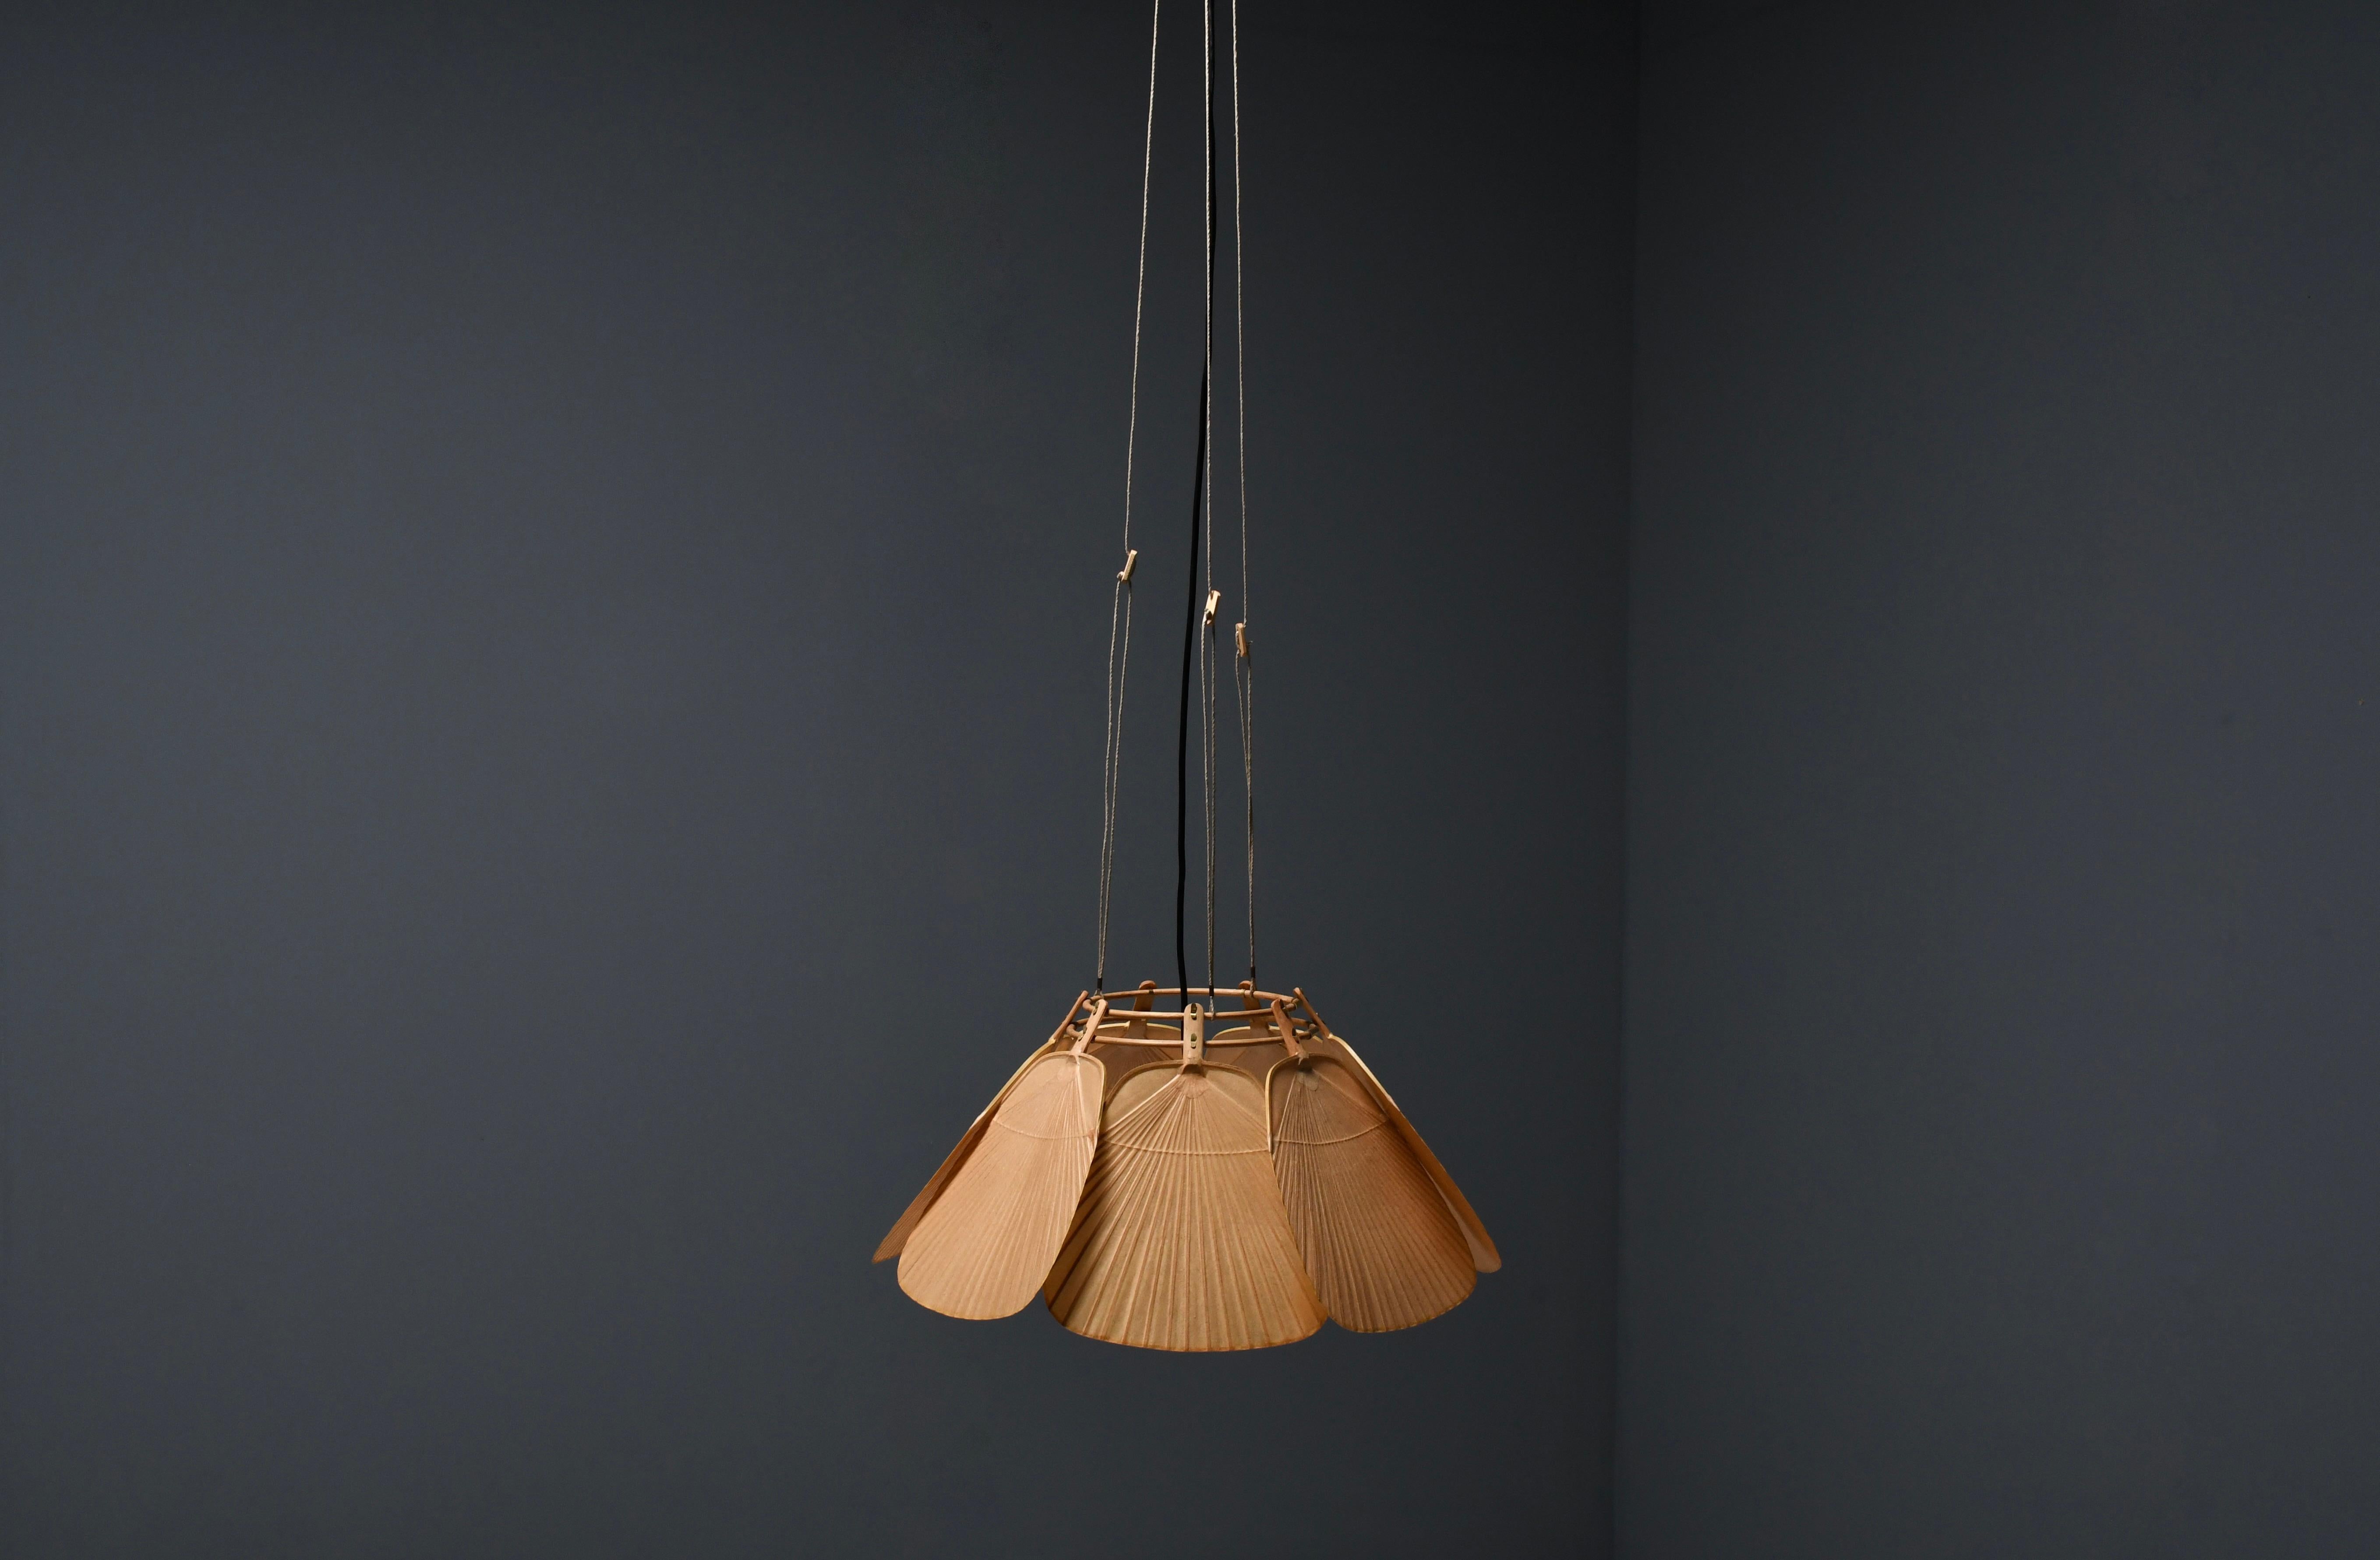 Rare Uchiwa Ju-Yon chandelier in very good condition. 

Designed by Ingo Maurer for M design, Germany. 

Two available!

This chandelier is handmade from bamboo and Japanese rice paper. 

The lamp consists of seven fans hanging from a bamboo frame.